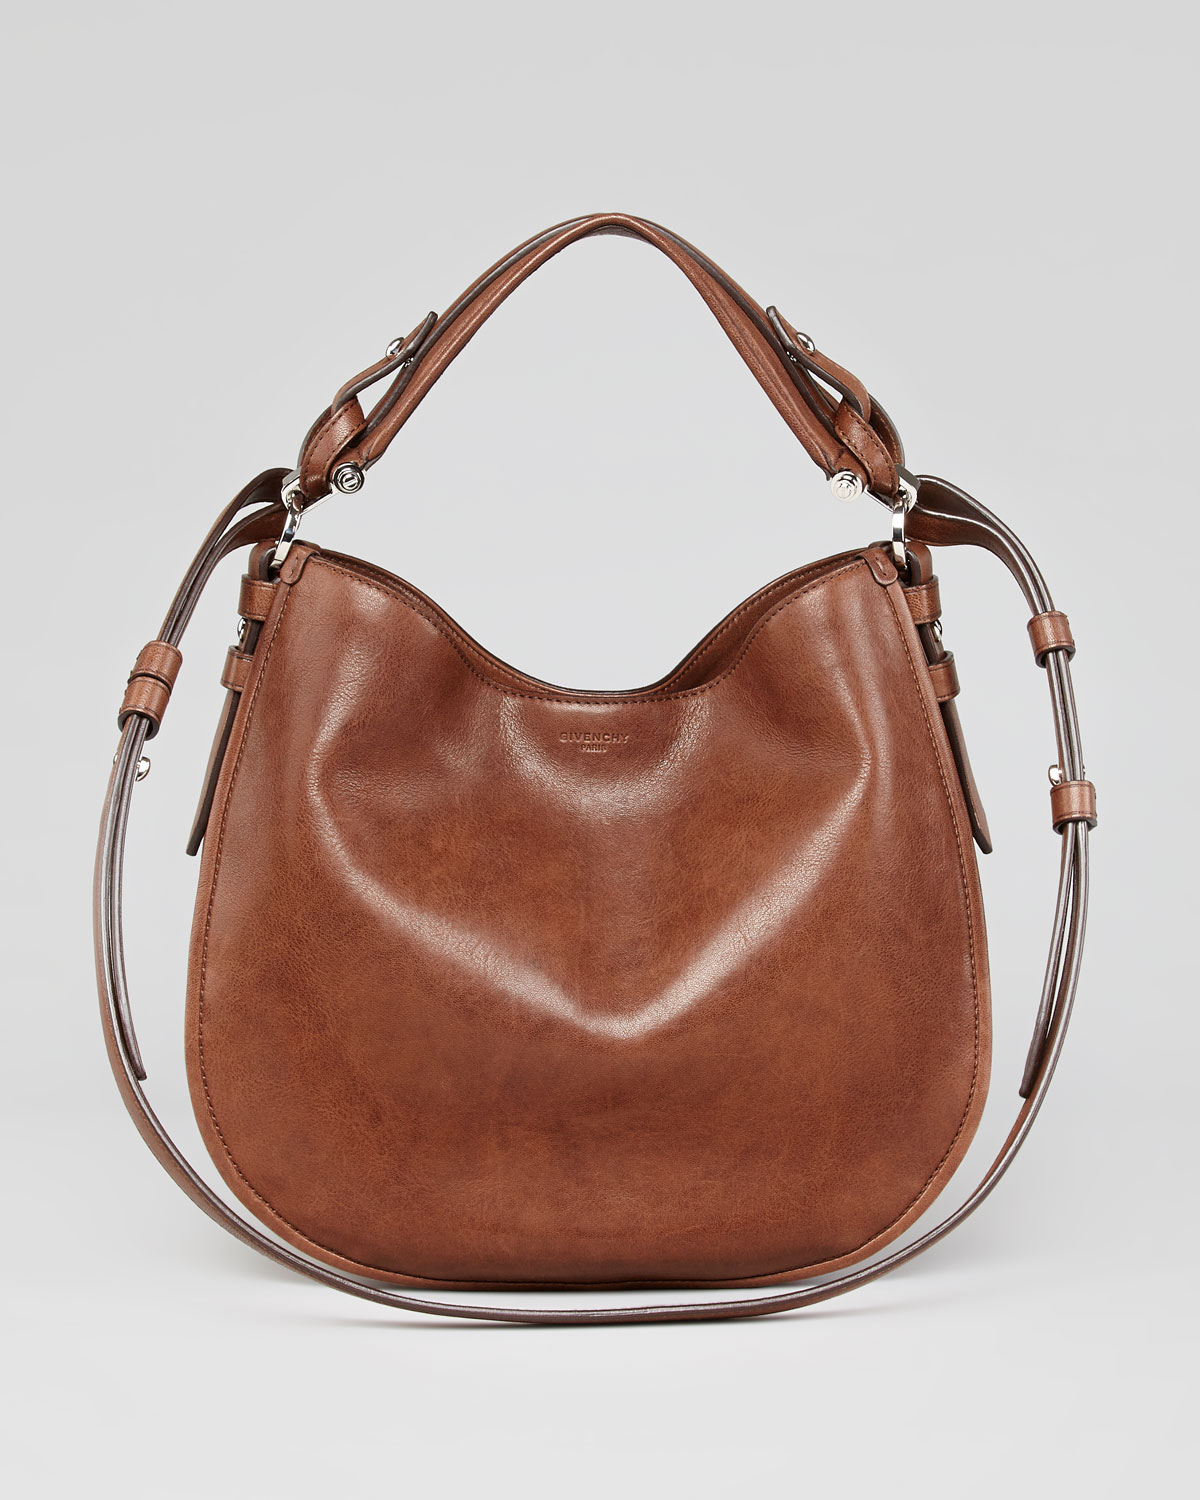 Givenchy Obsedia Small Leather Hobo Bag in Brown - Lyst